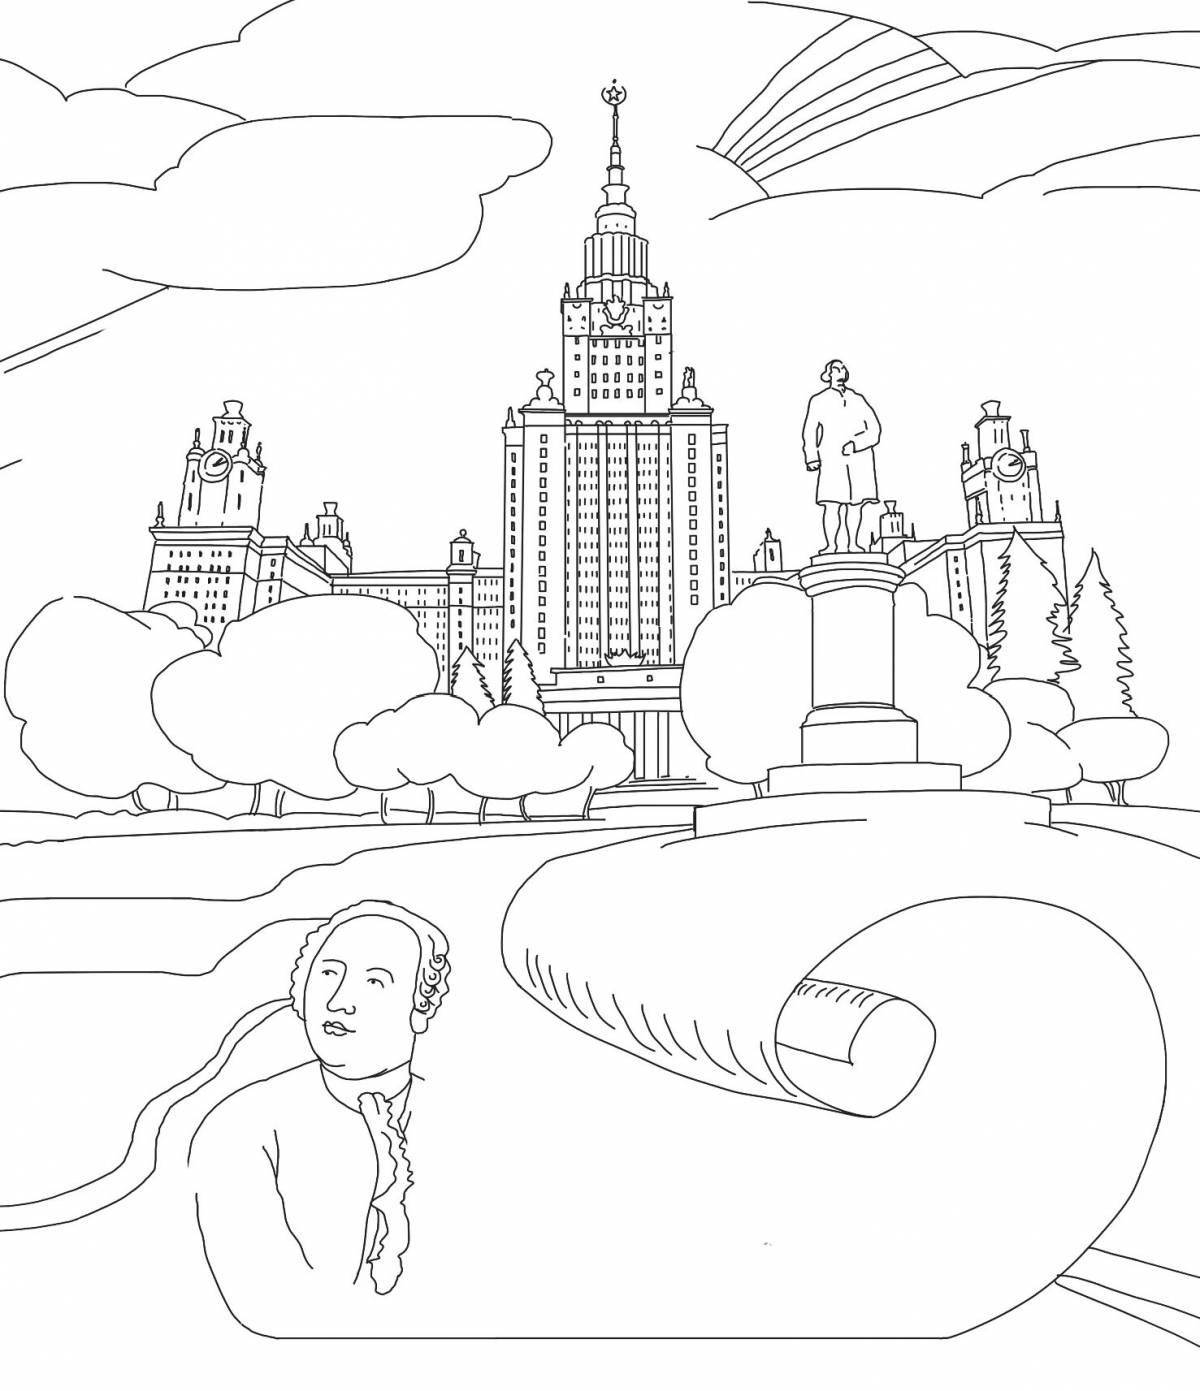 Coloring page dazzling moscow state university